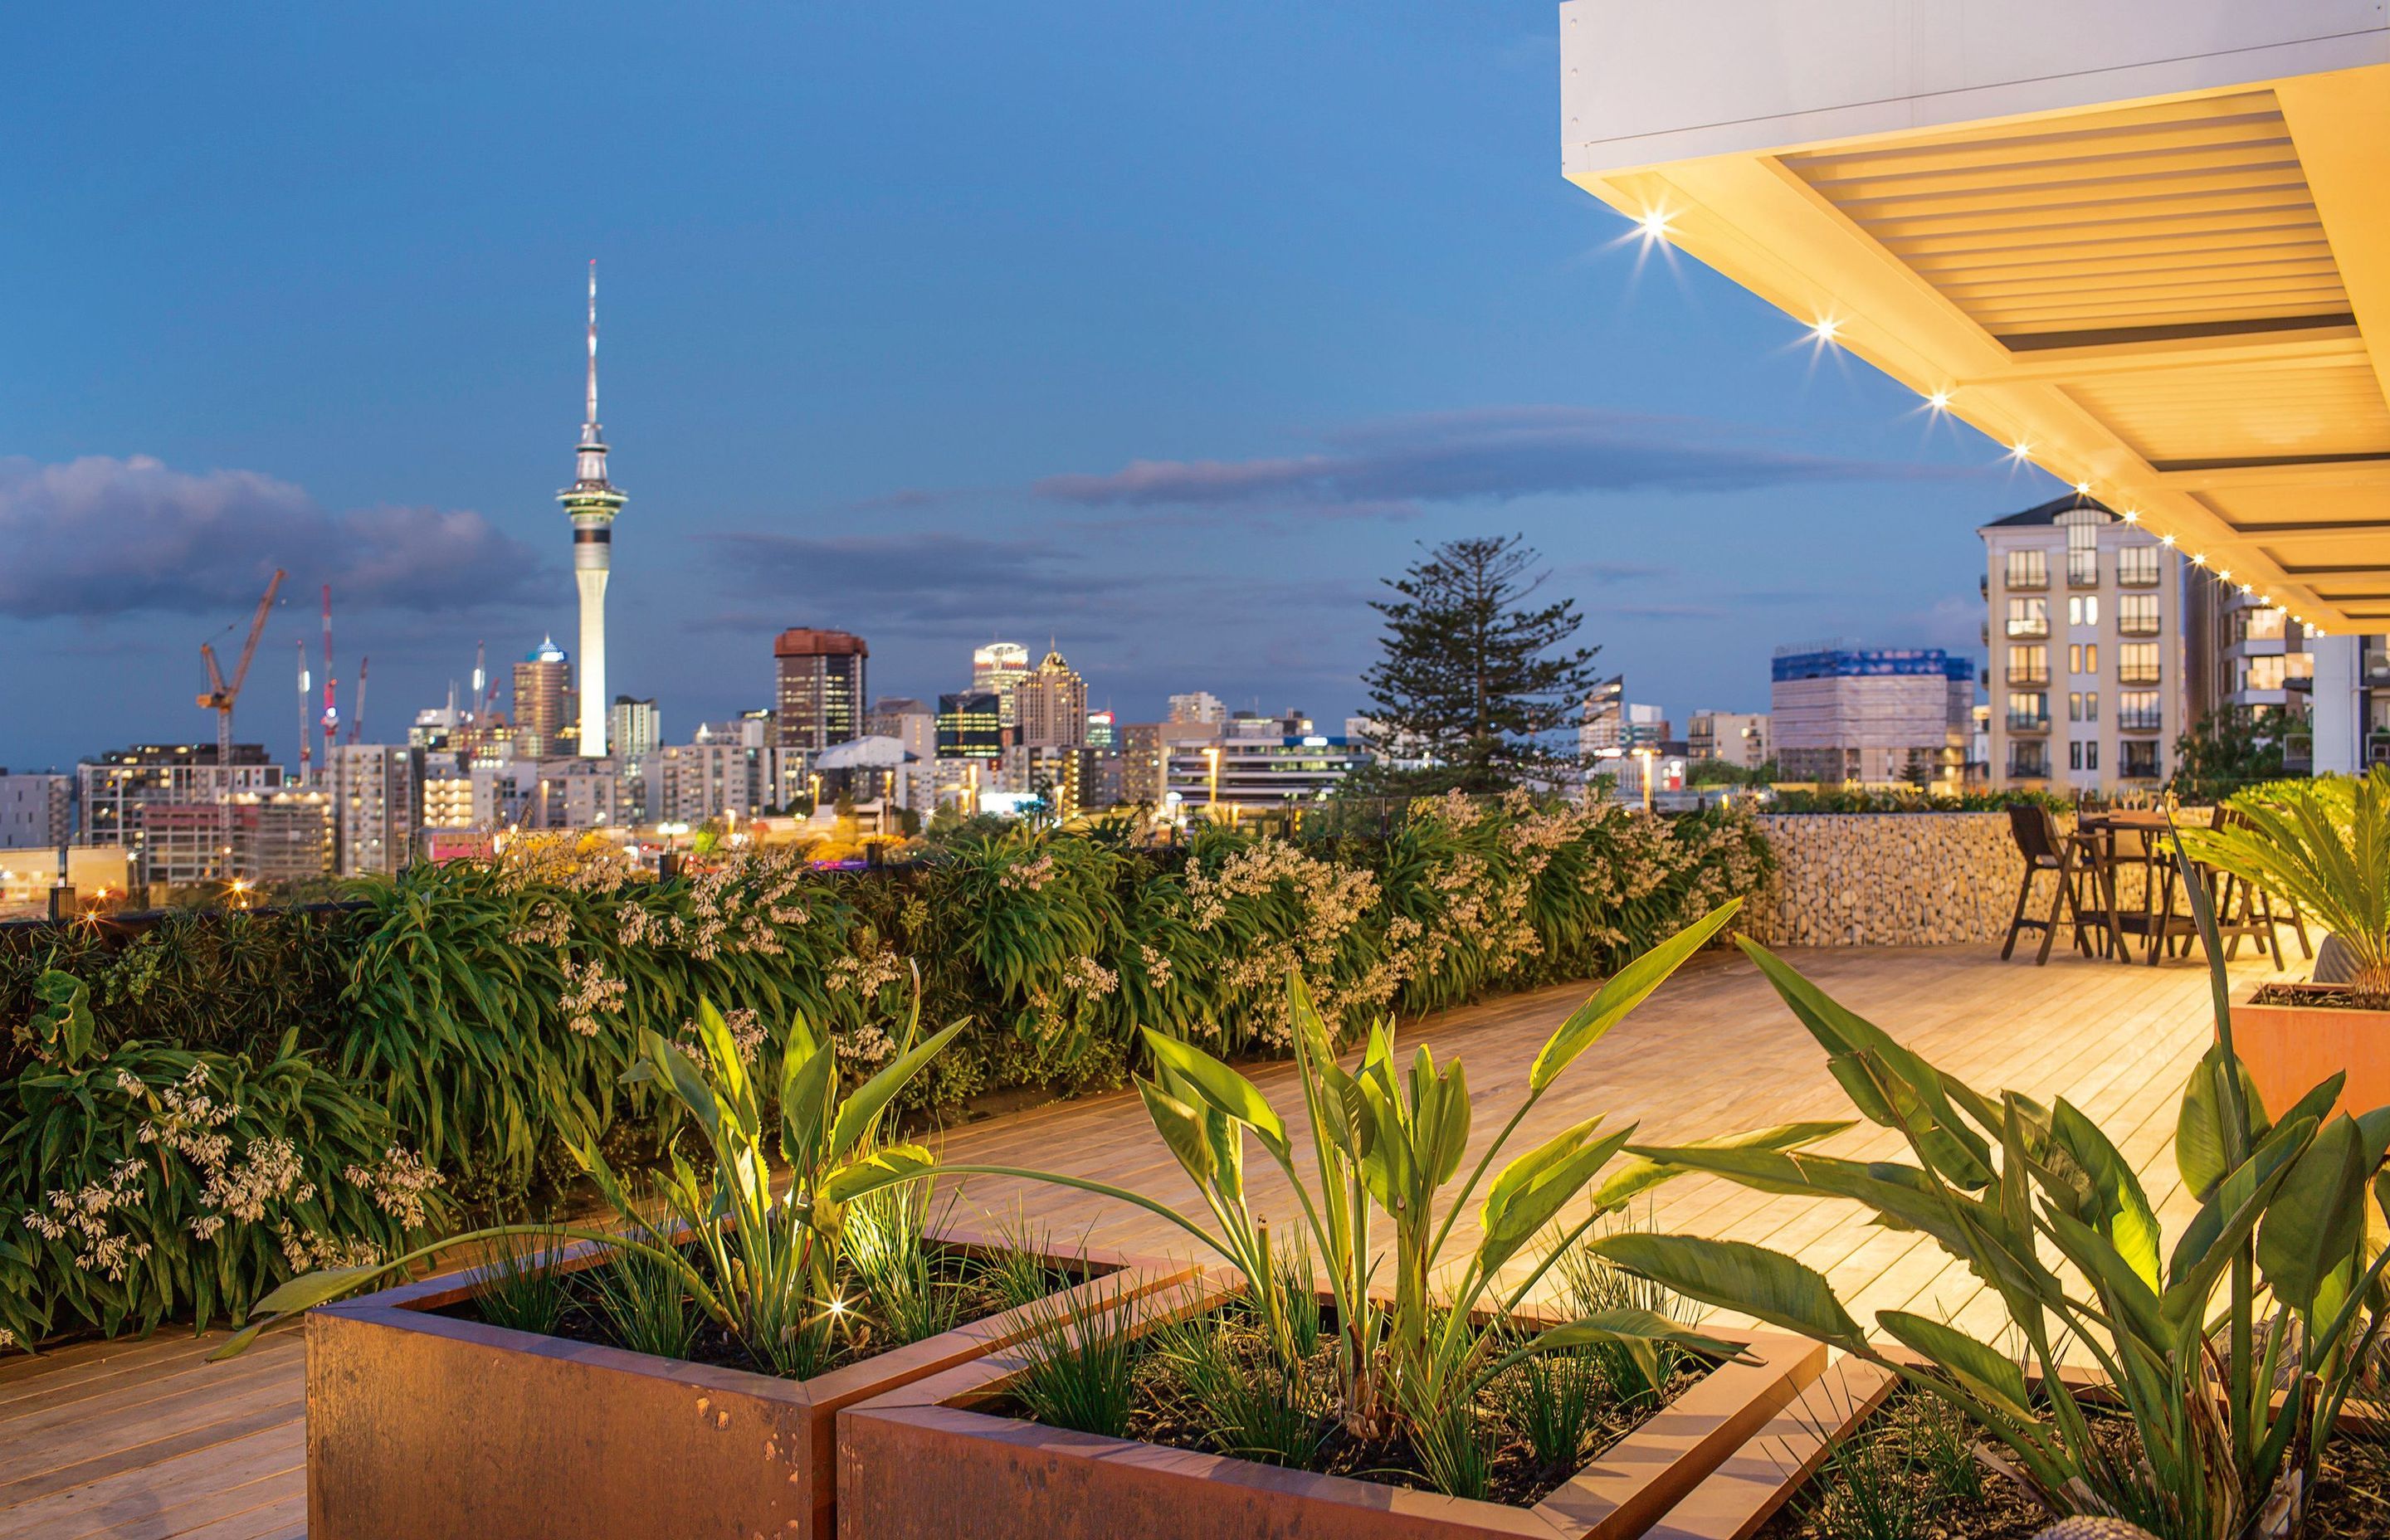 Natural Habitats designed and built a rooftop landscape for this private Auckland apartment. The completed landscape includes a green wall, timber deck, raised gabion planters and a custom water feature.